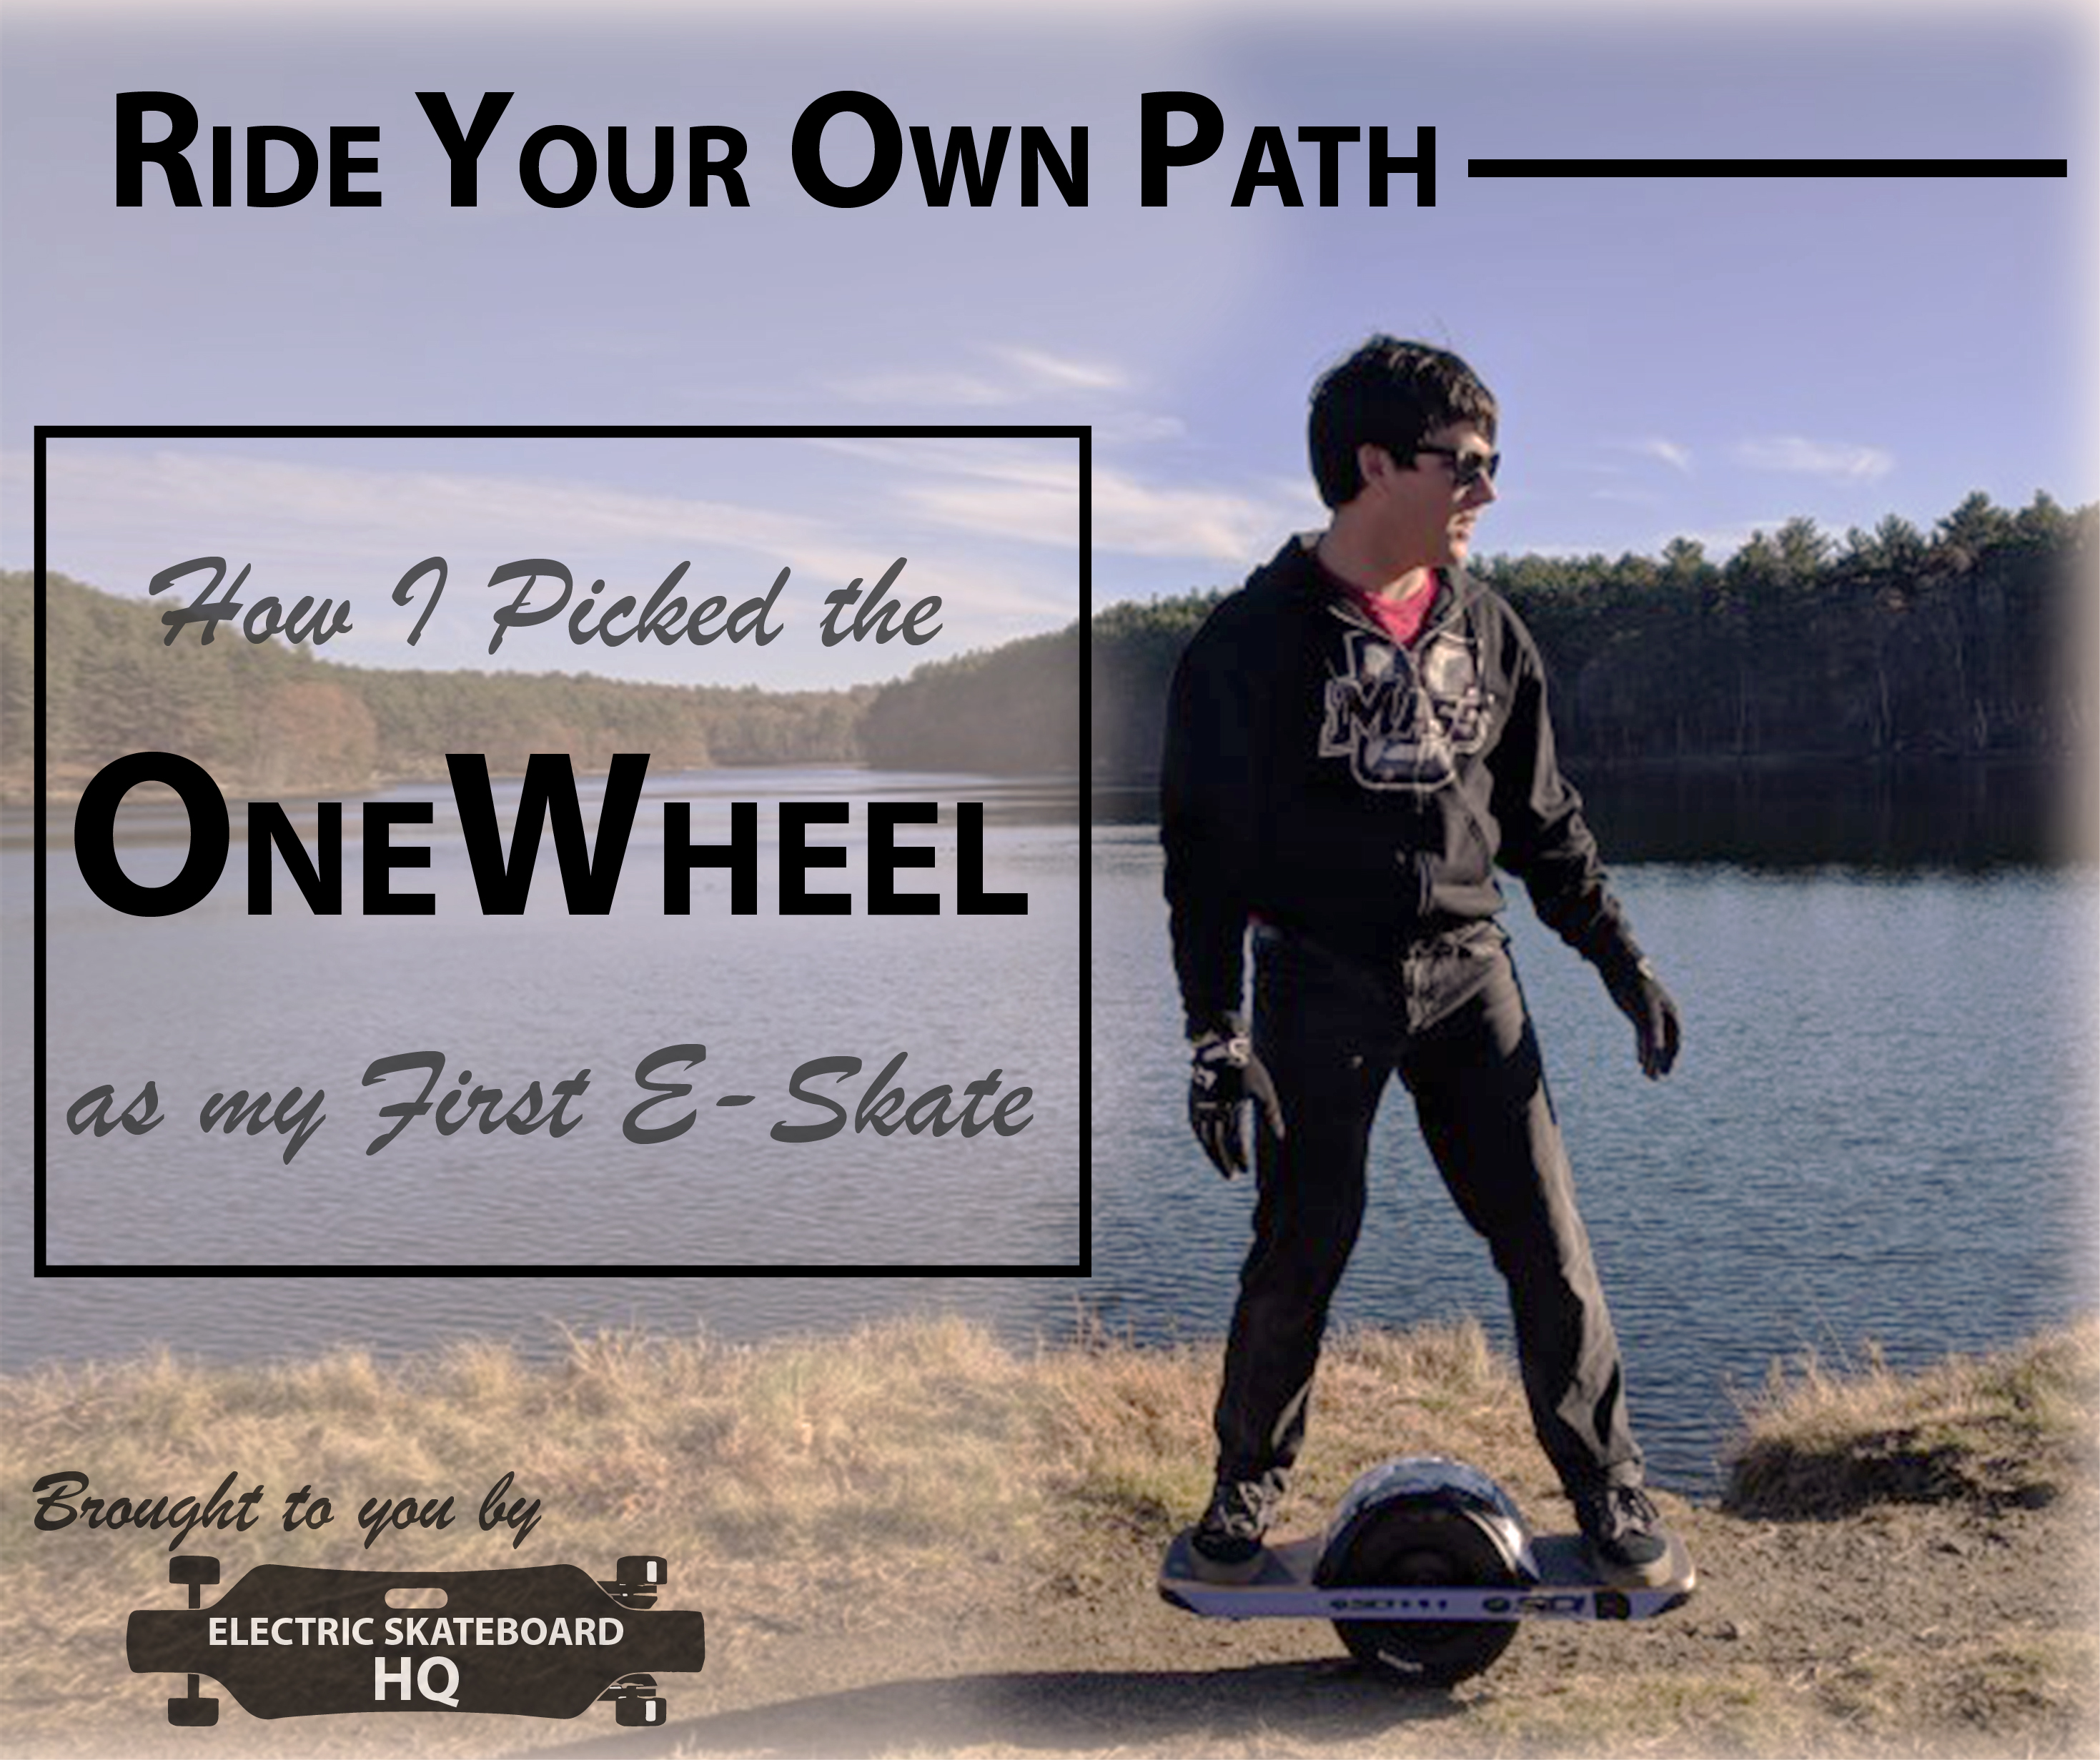 Ride Your Own Path: How I Picked the One Wheel as my First E-Skate